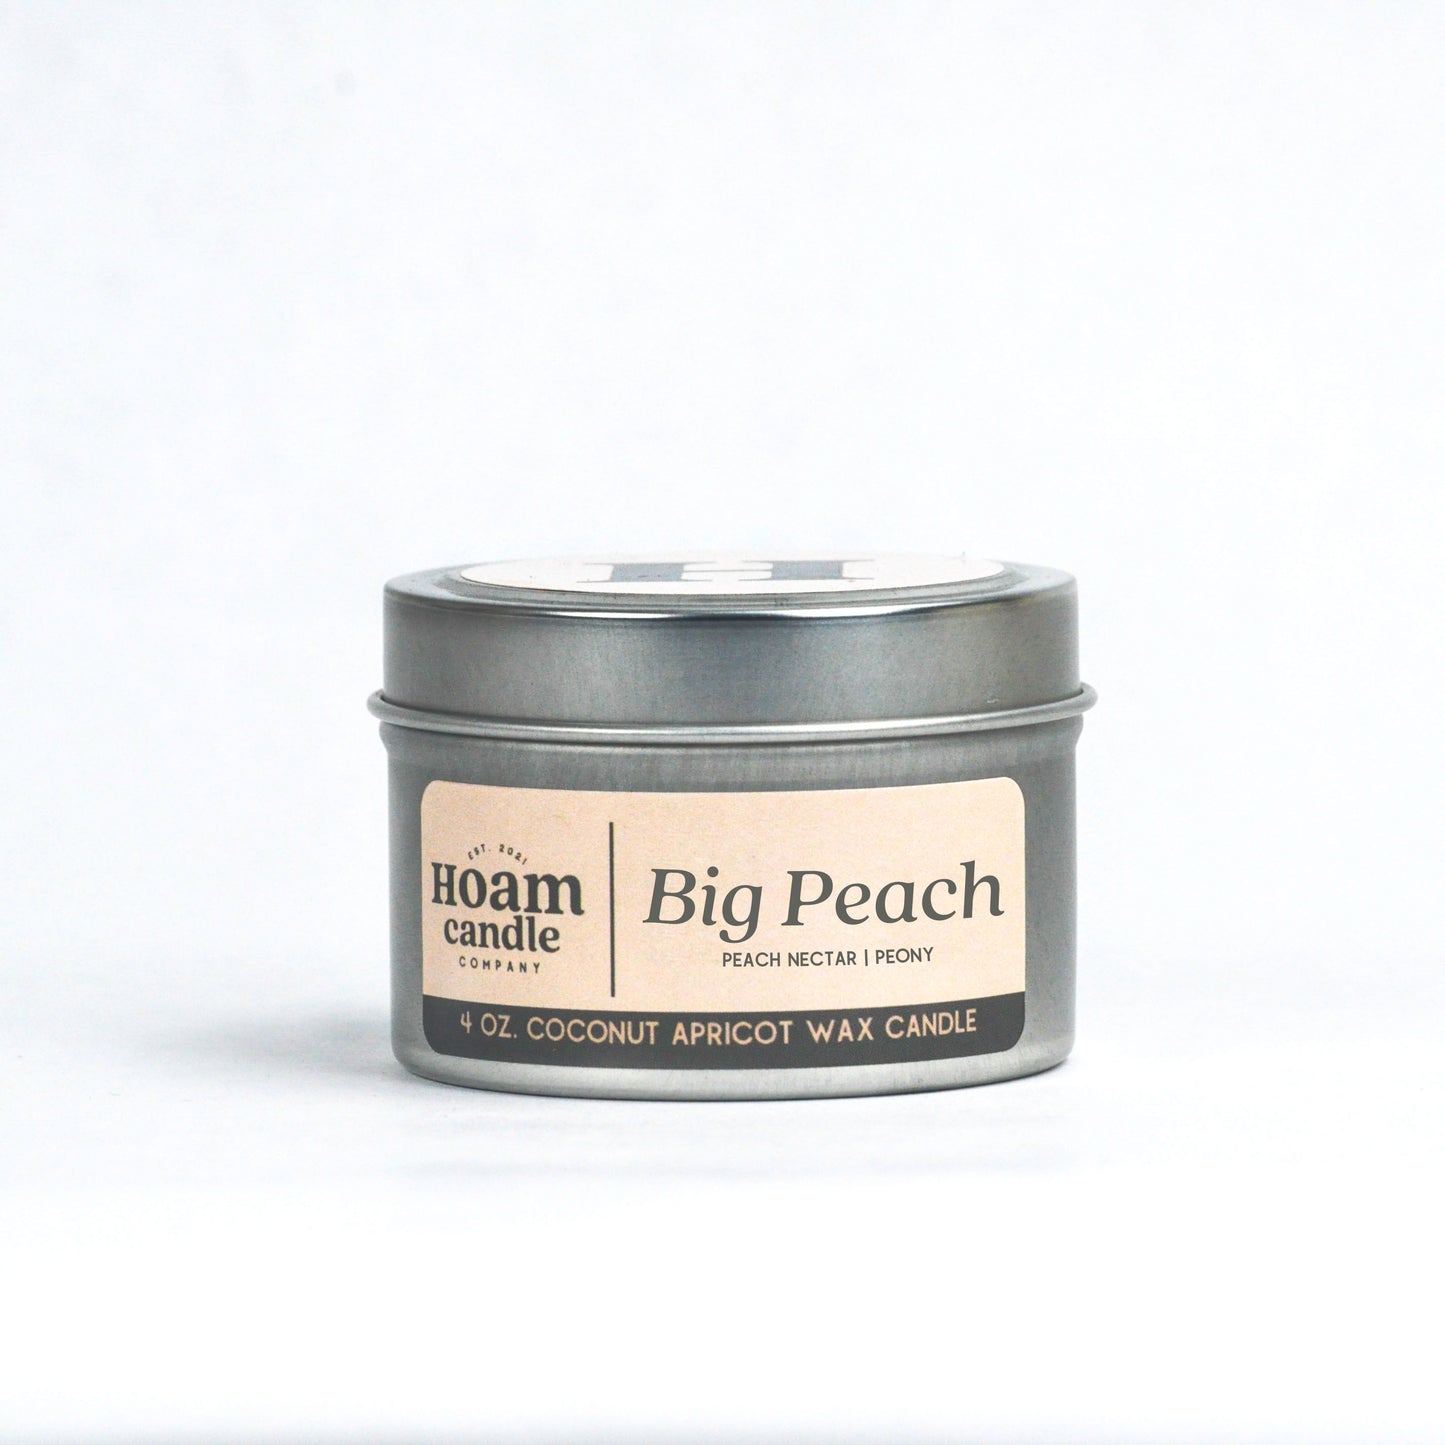 Big Peach Scented Candle from HOAM Candle Company